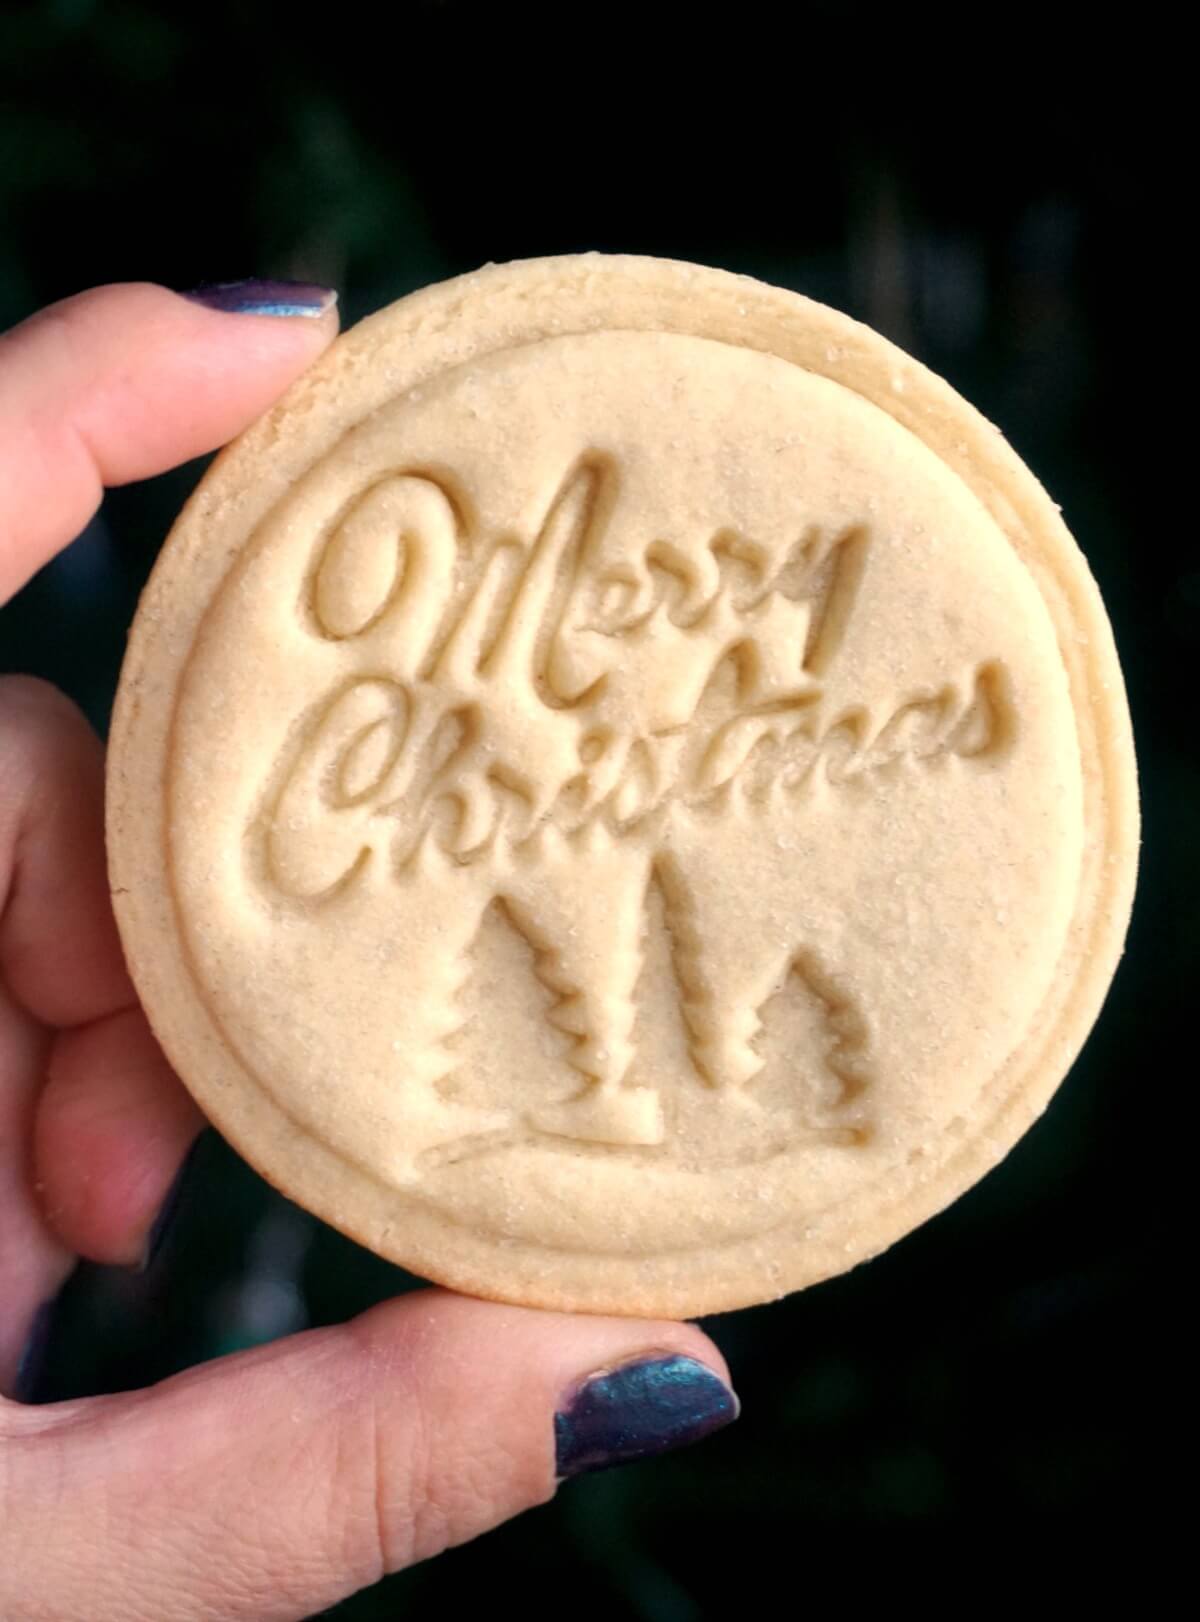 A hand holding a Christmas stamped cookie.